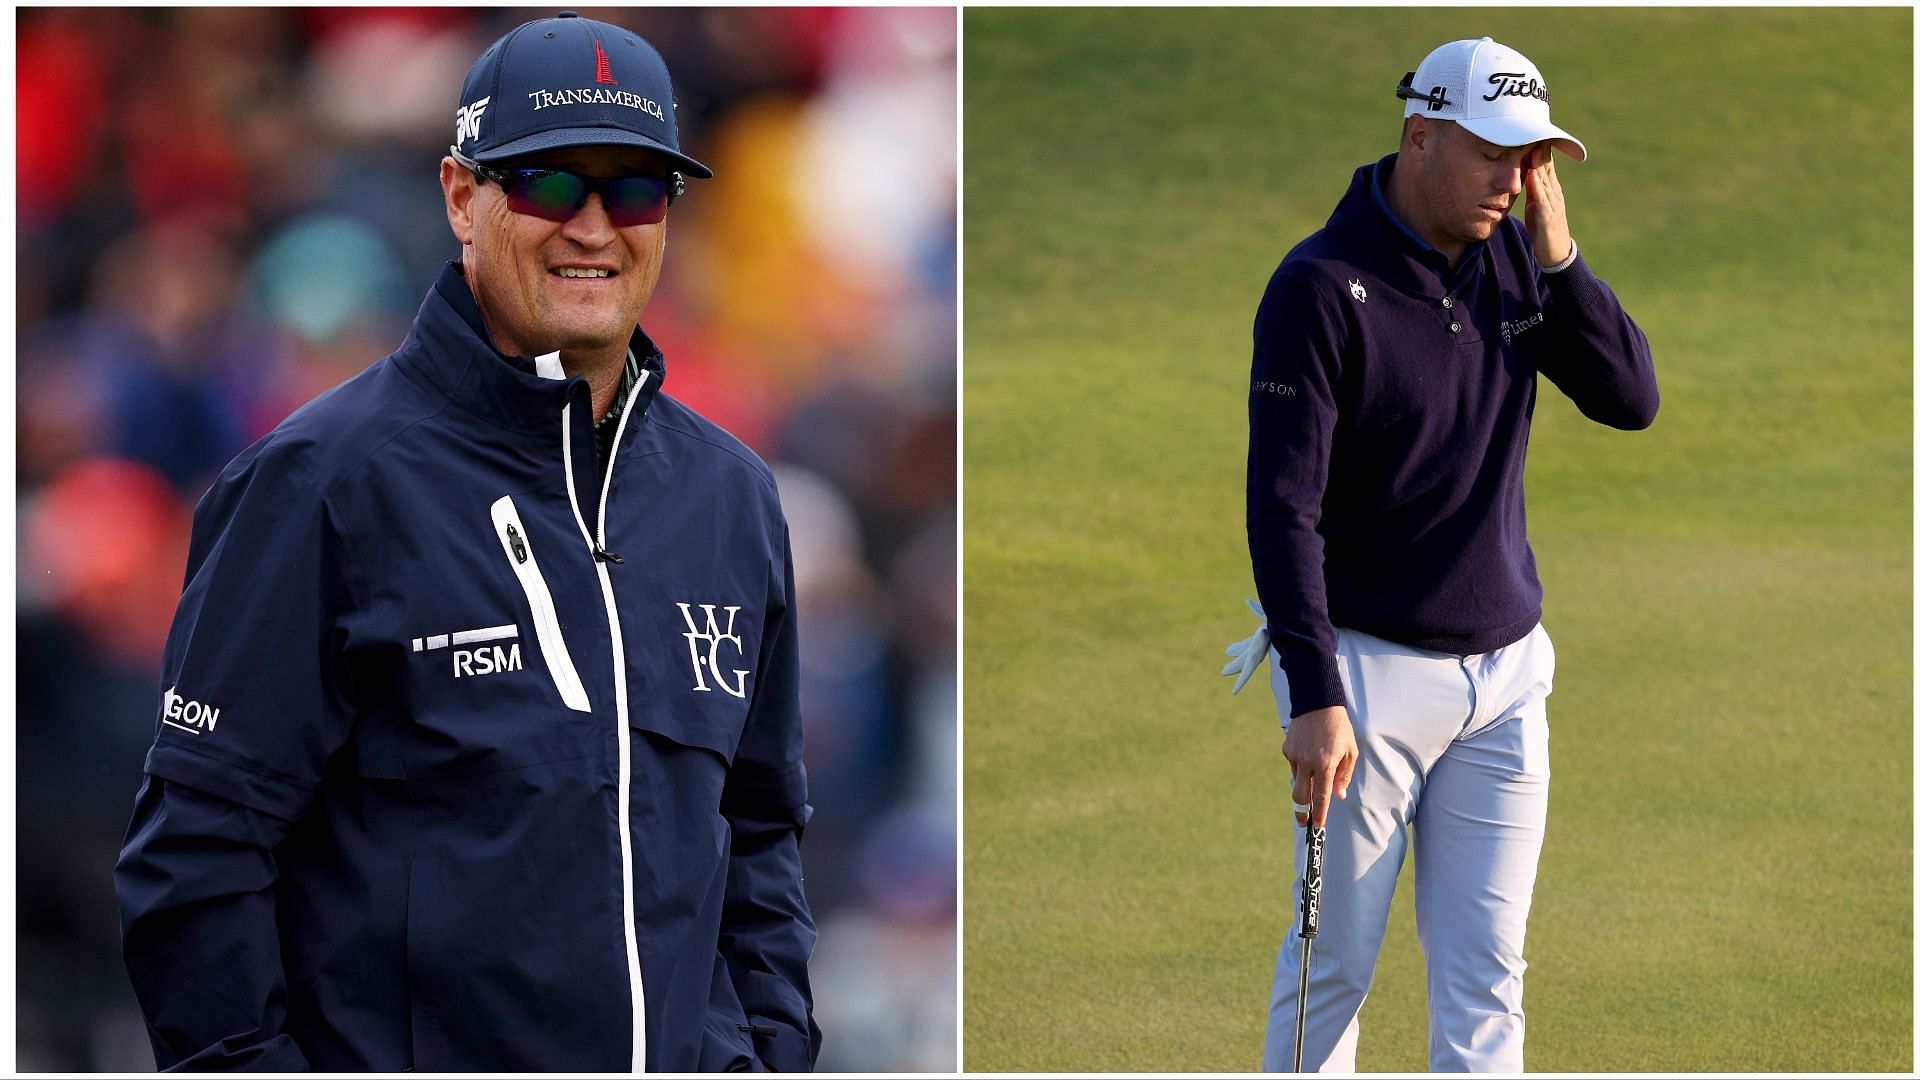 Zach Johnson and Justin Smith at the Open Championship (via Getty Images)